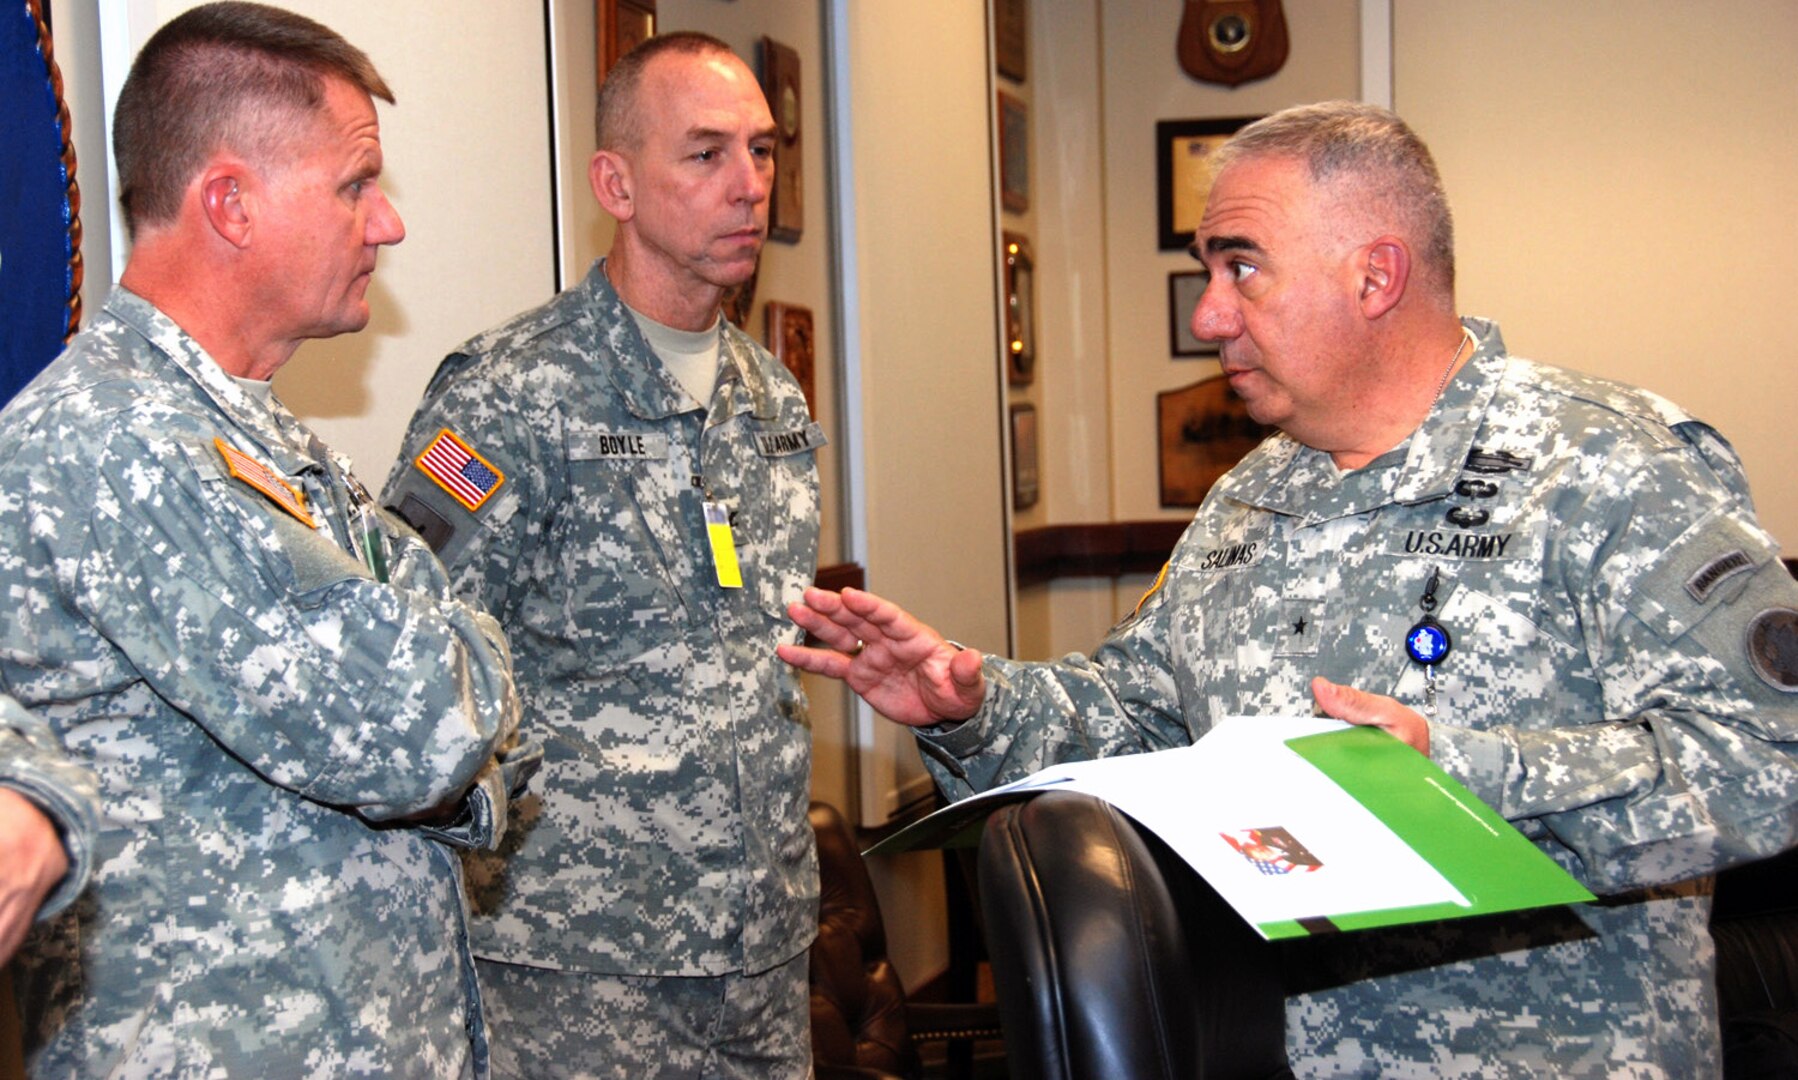 Photo by Robert R. Ramon
Brig. Gen. Orlando Salinas (right), U.S. Army South deputy commanding general, speaks to Col. David Boyle (center), Missouri Army National Guard chief of staff and Brig. Gen. Randy Alewel (left), 35th Engineer Brigade commanding general, at the Army South headquarters.